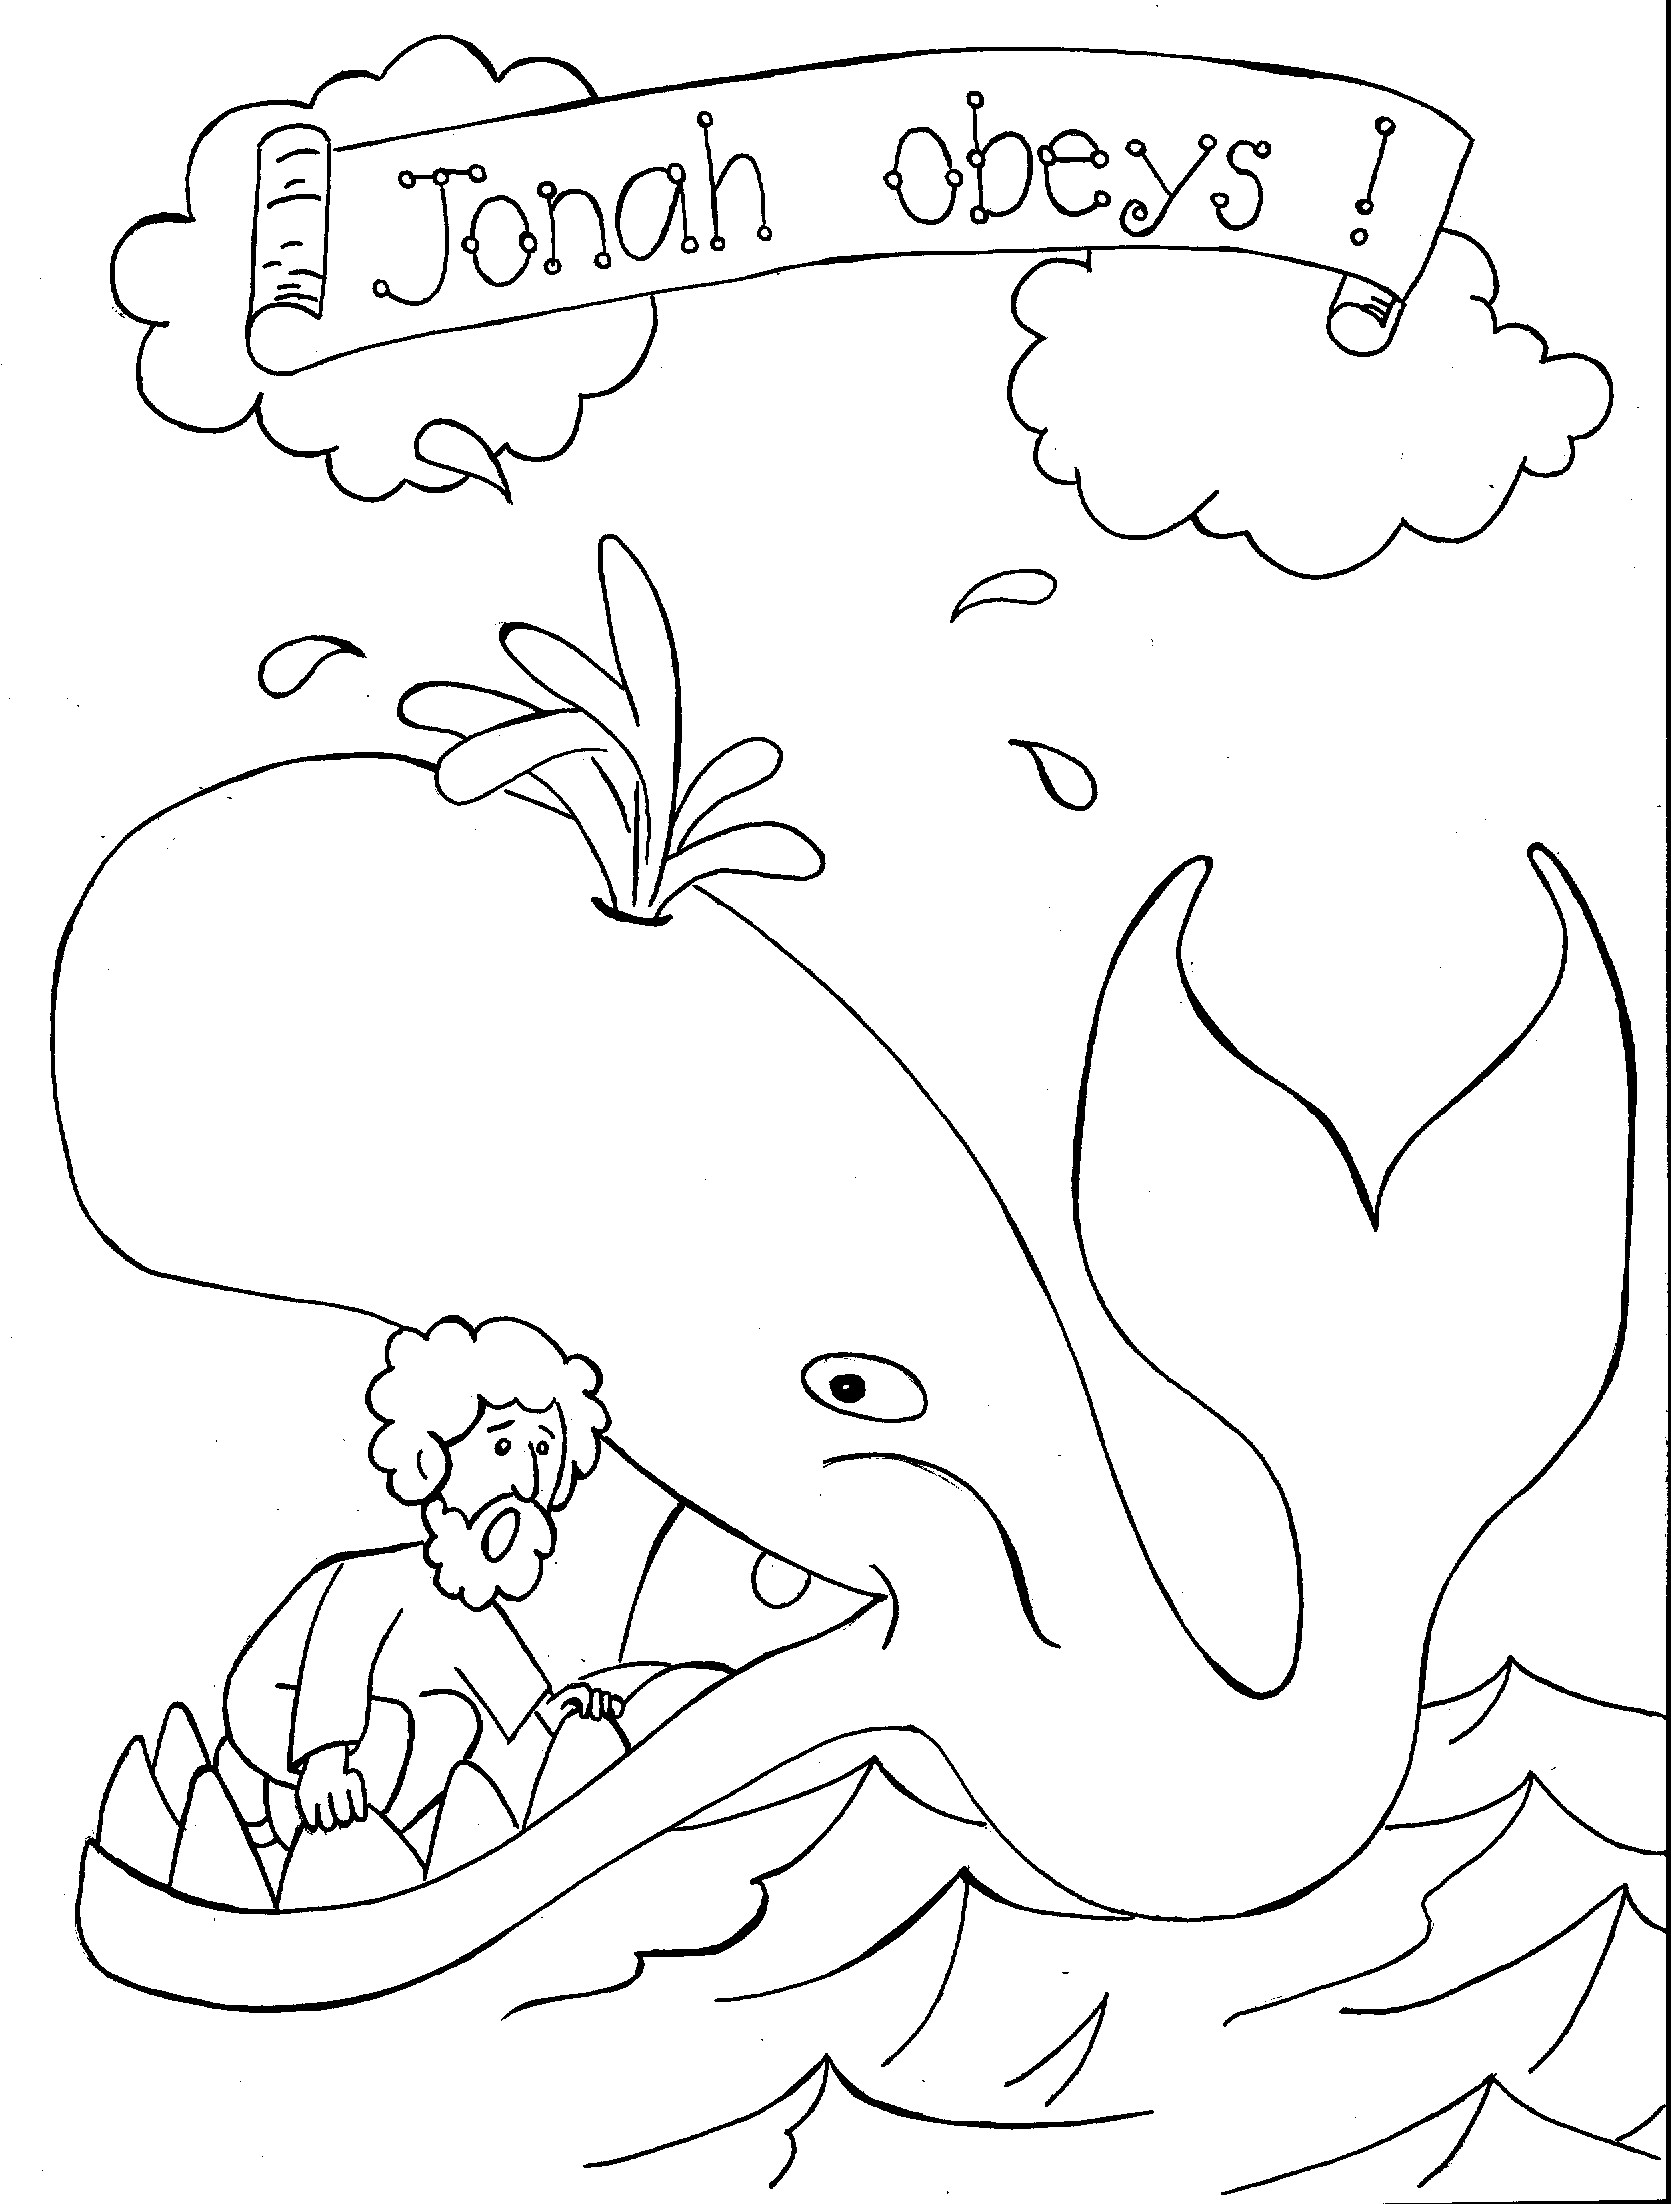 Bibles Study Coloring Sheets For Kids
 Bible Story Coloring Pages Are Coloring Pages To Use With